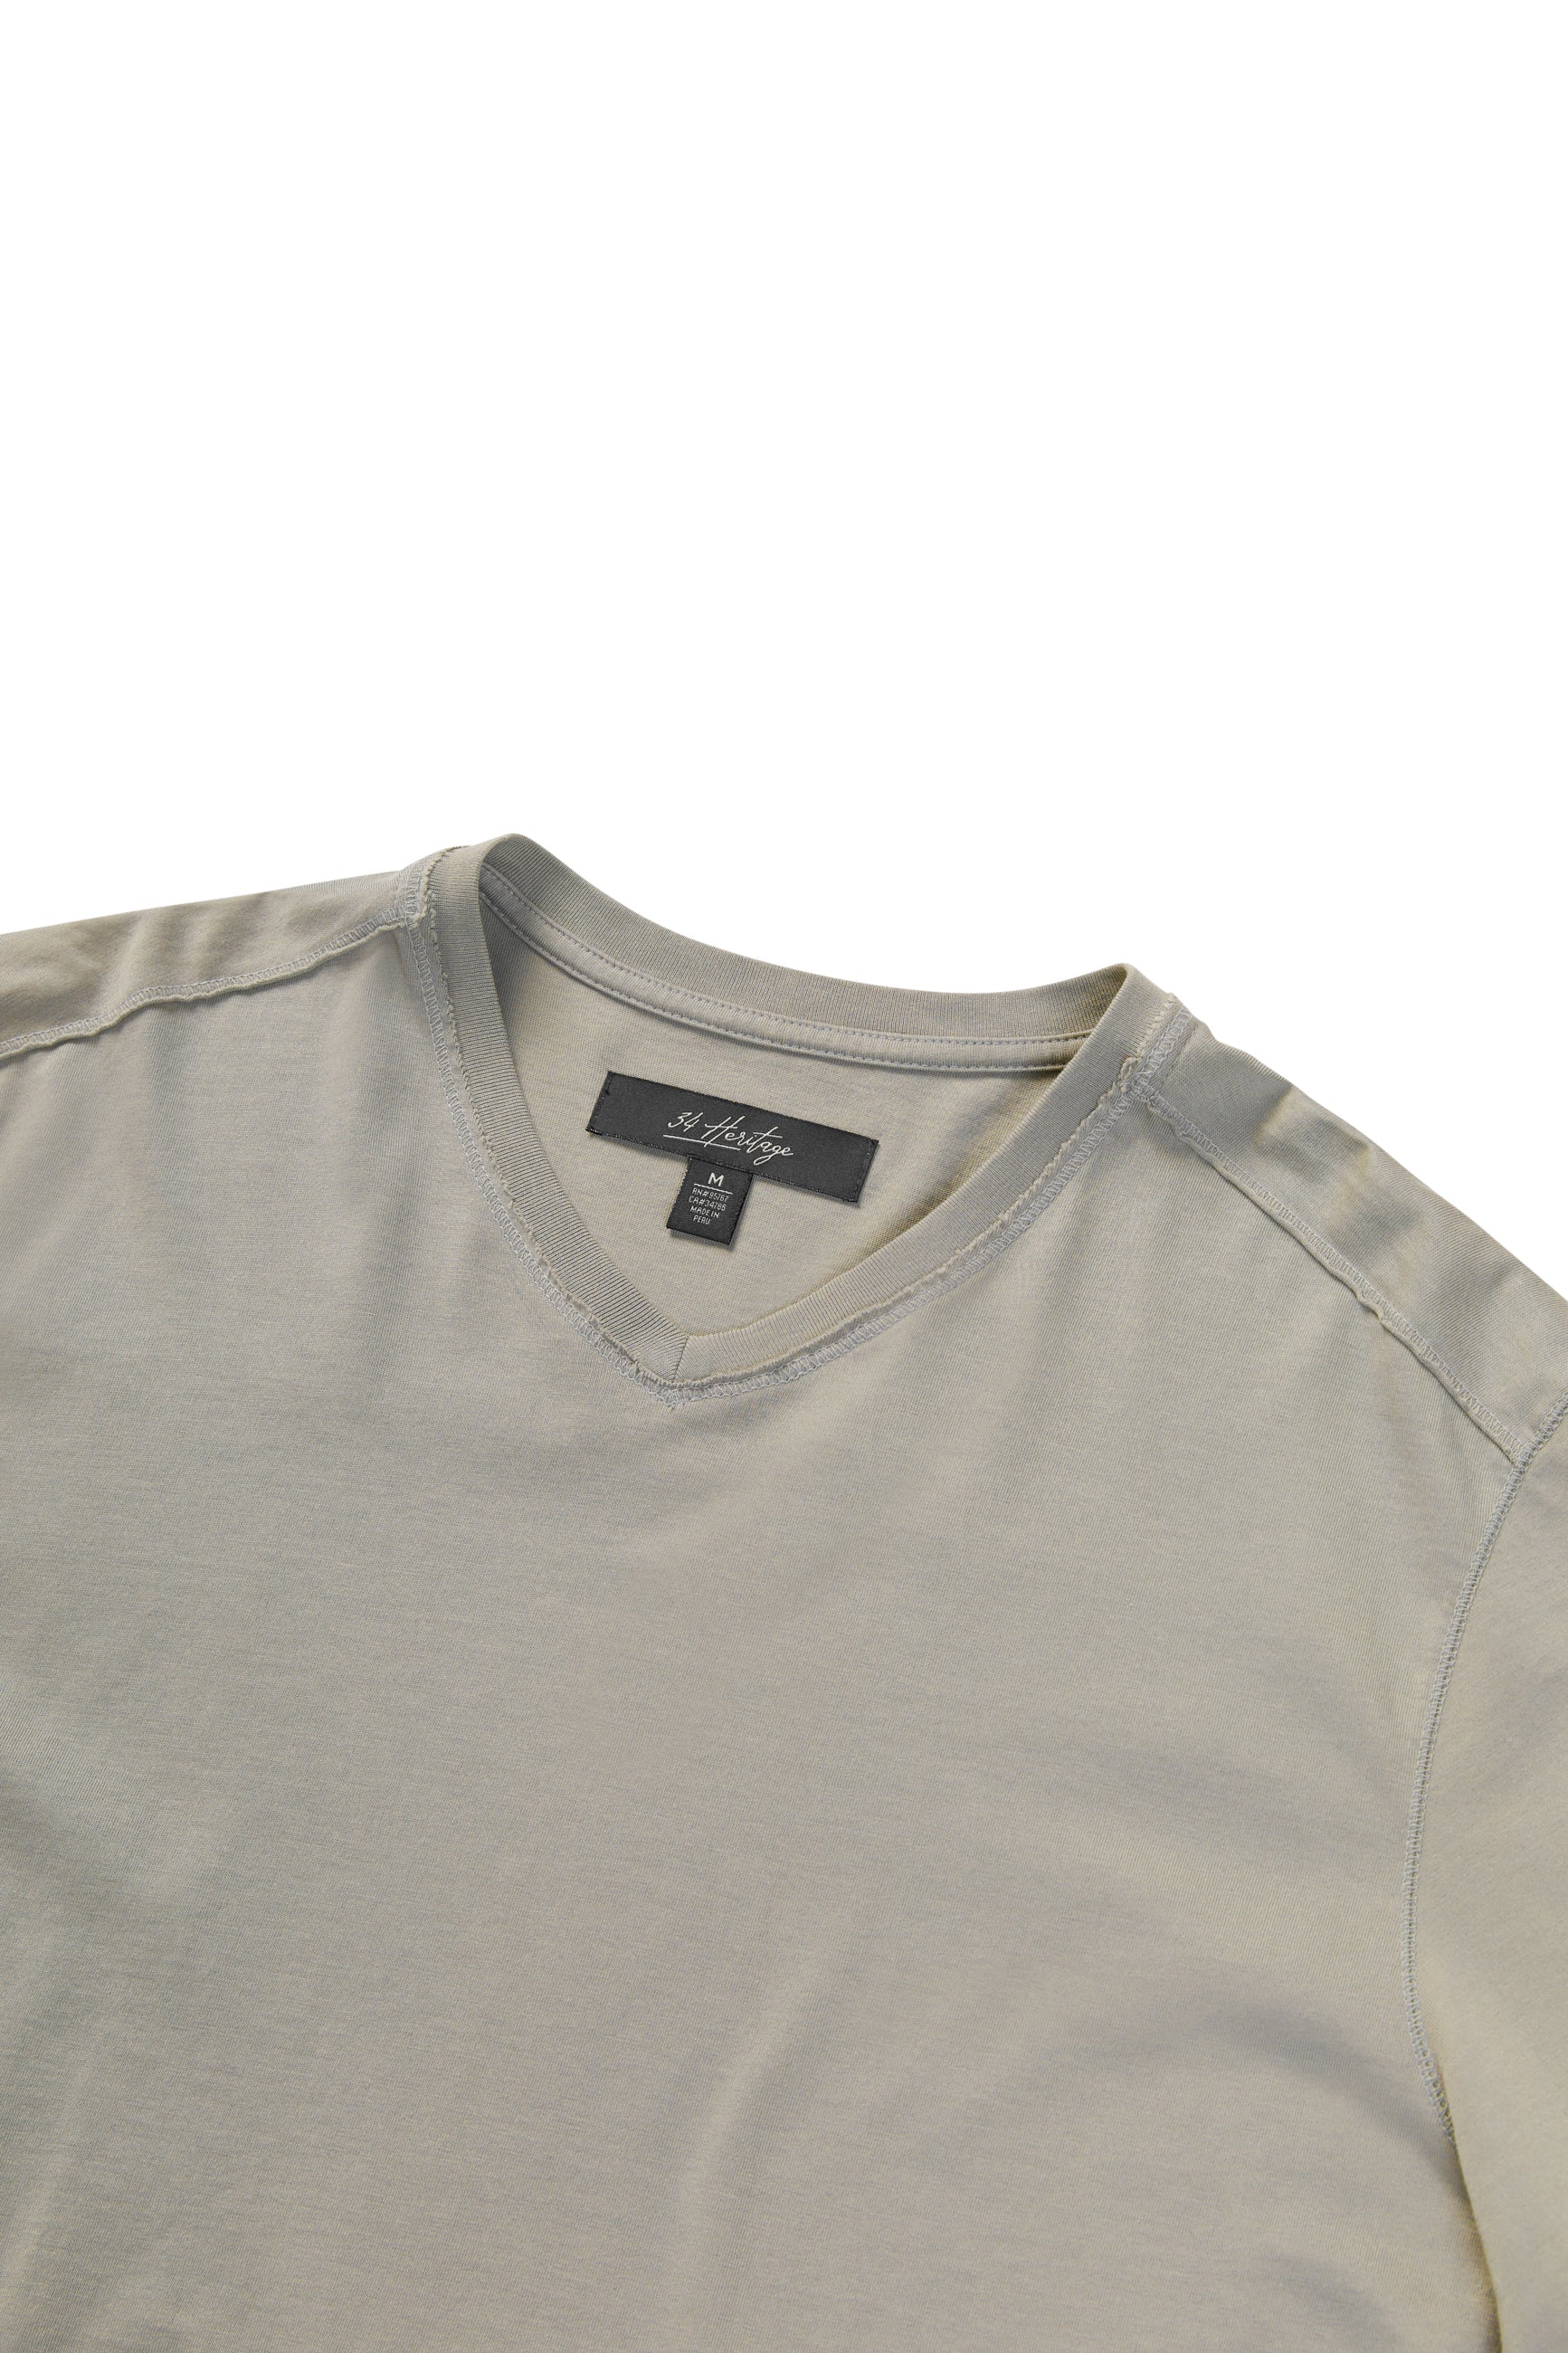 Deconstructed V-Neck T-Shirt in White Dove Image 8